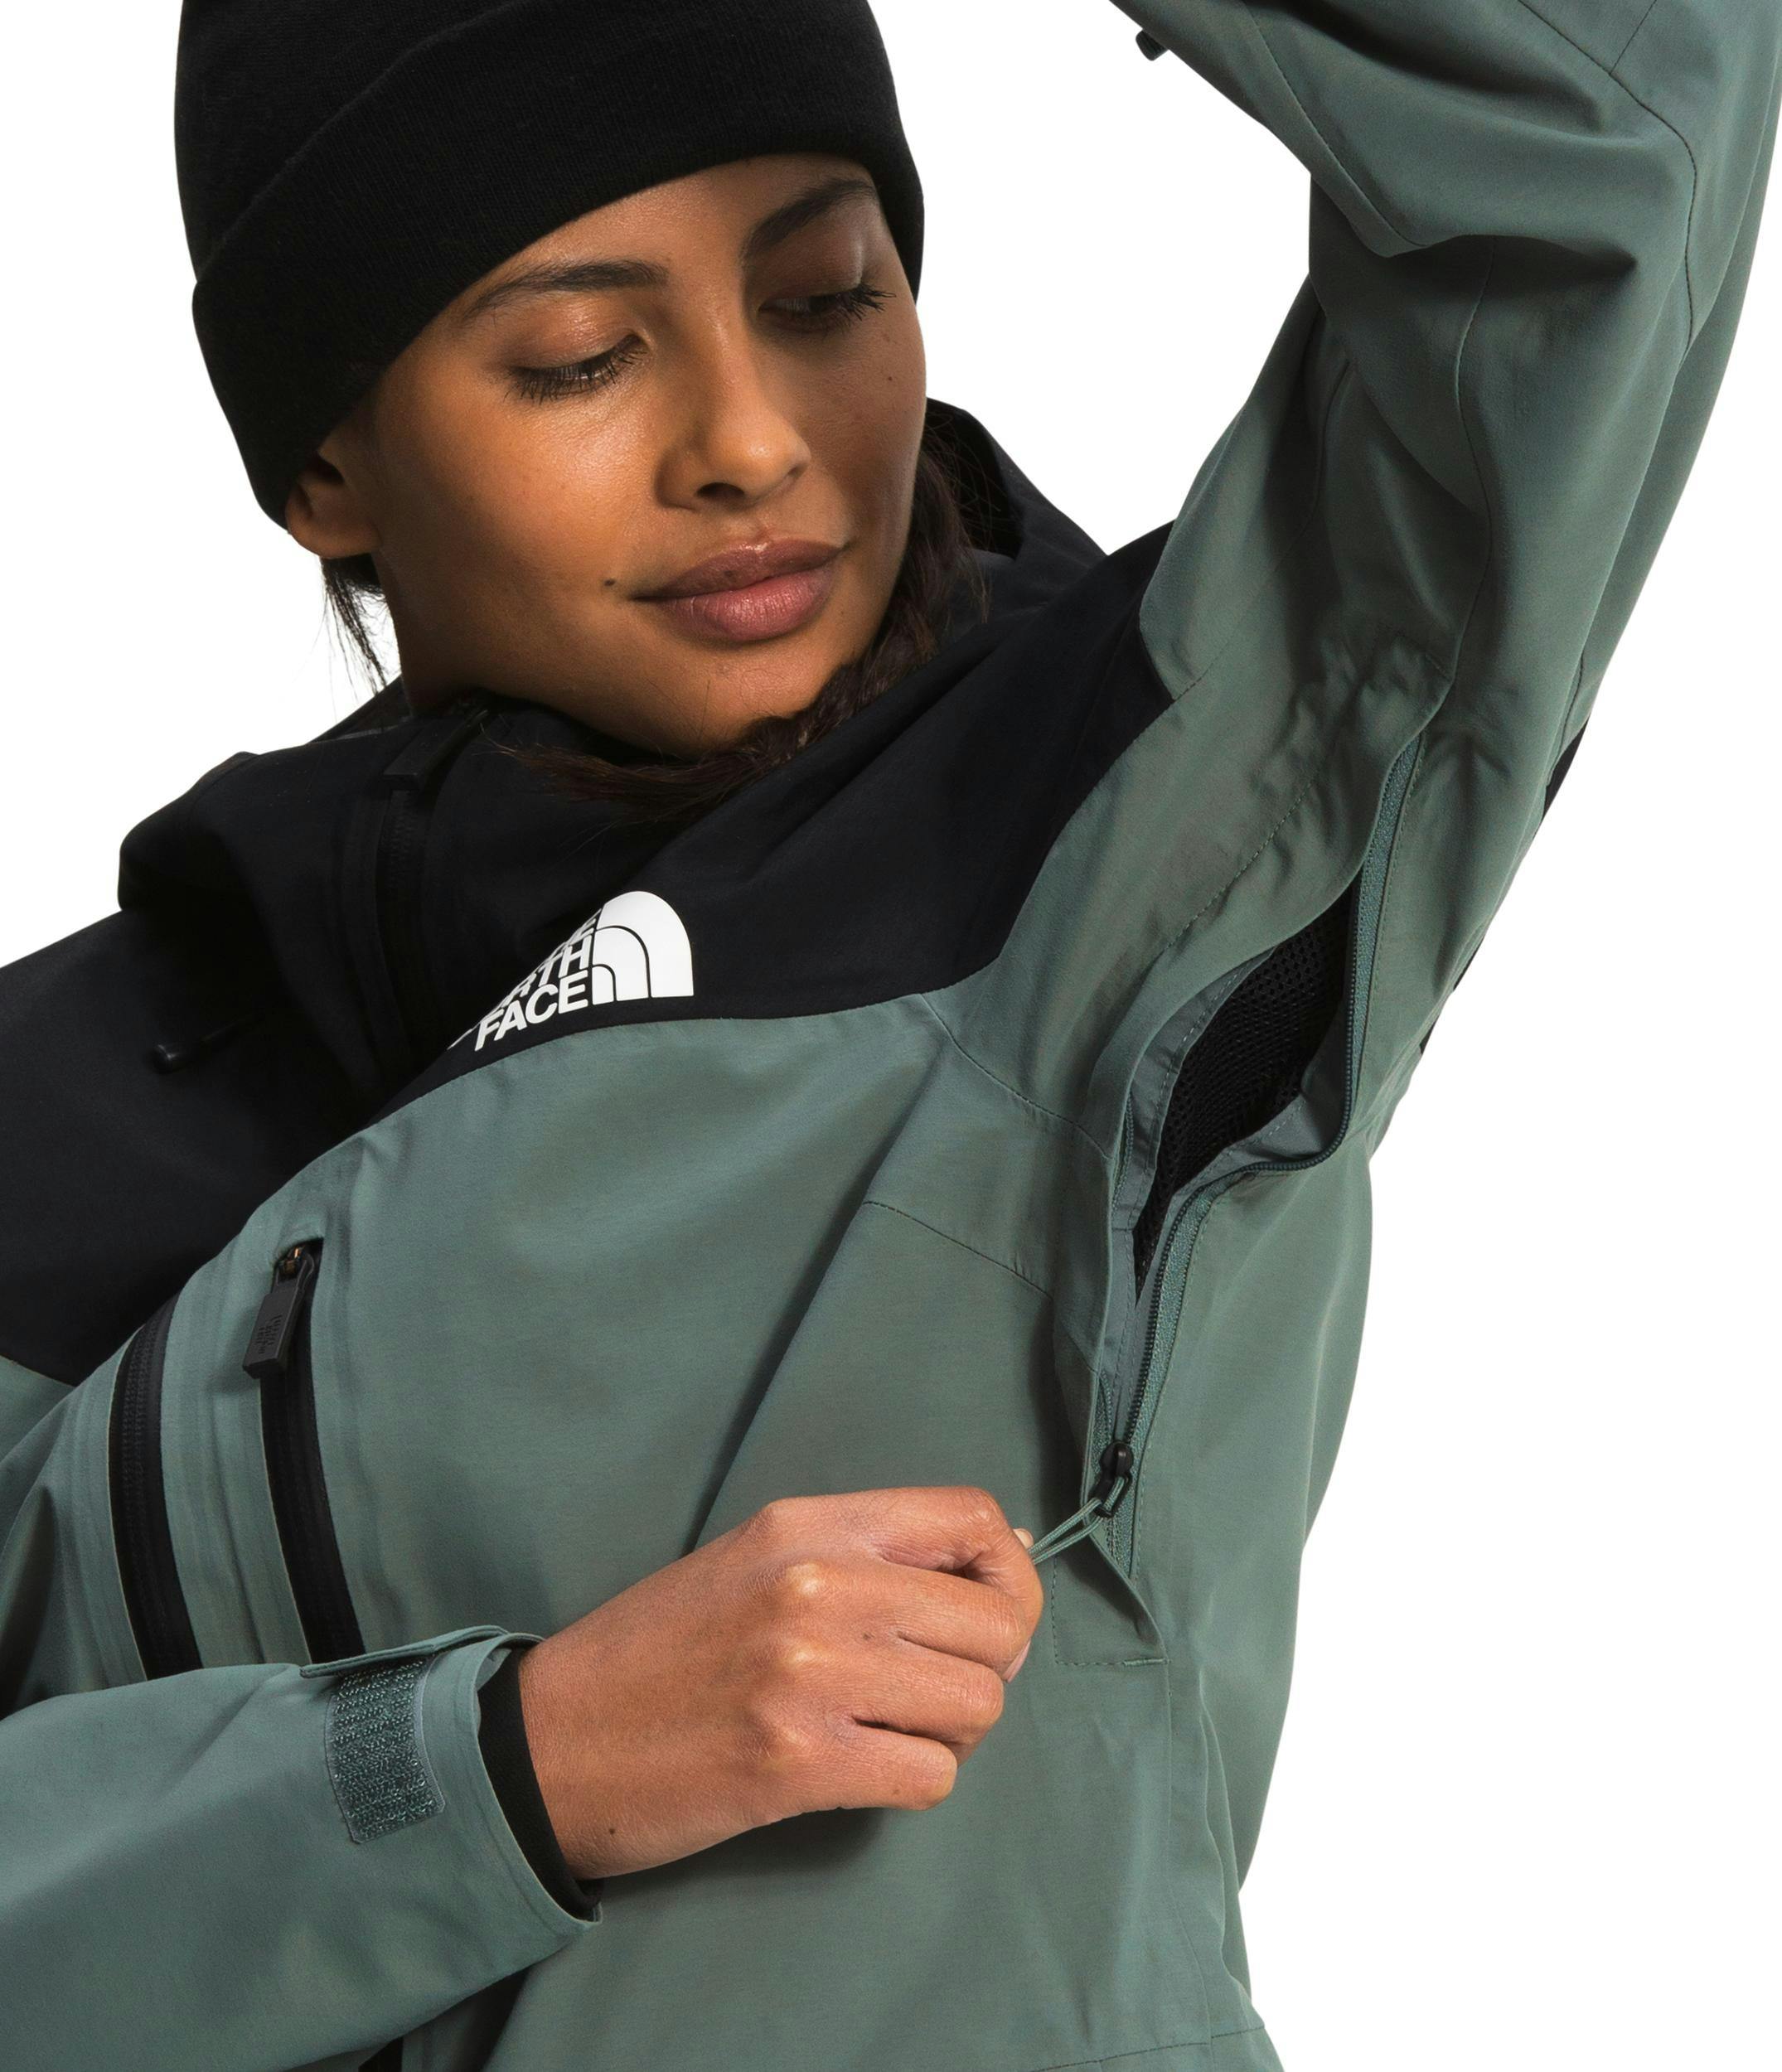 Top The North Face Jackets | Curated.com